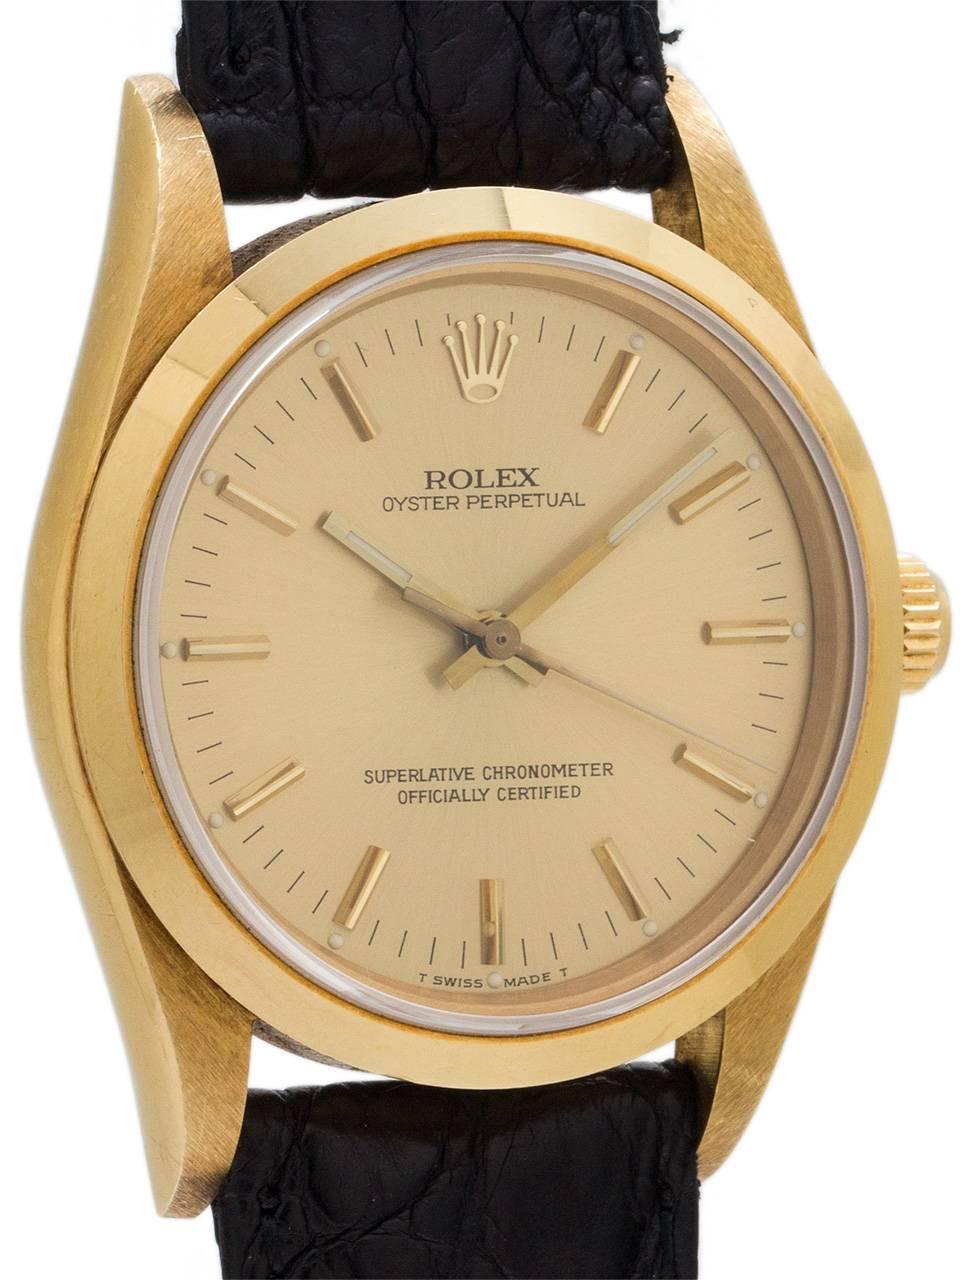 
Rolex Oyster Perpetual 18K YG ref 14208 circa 1988. Featuring 34mm diameter case with smooth bezel and sapphire crystal and original champagne dial with applied gold indexes and gilt baton hands. Powered by self winding calibre 3130 movement with